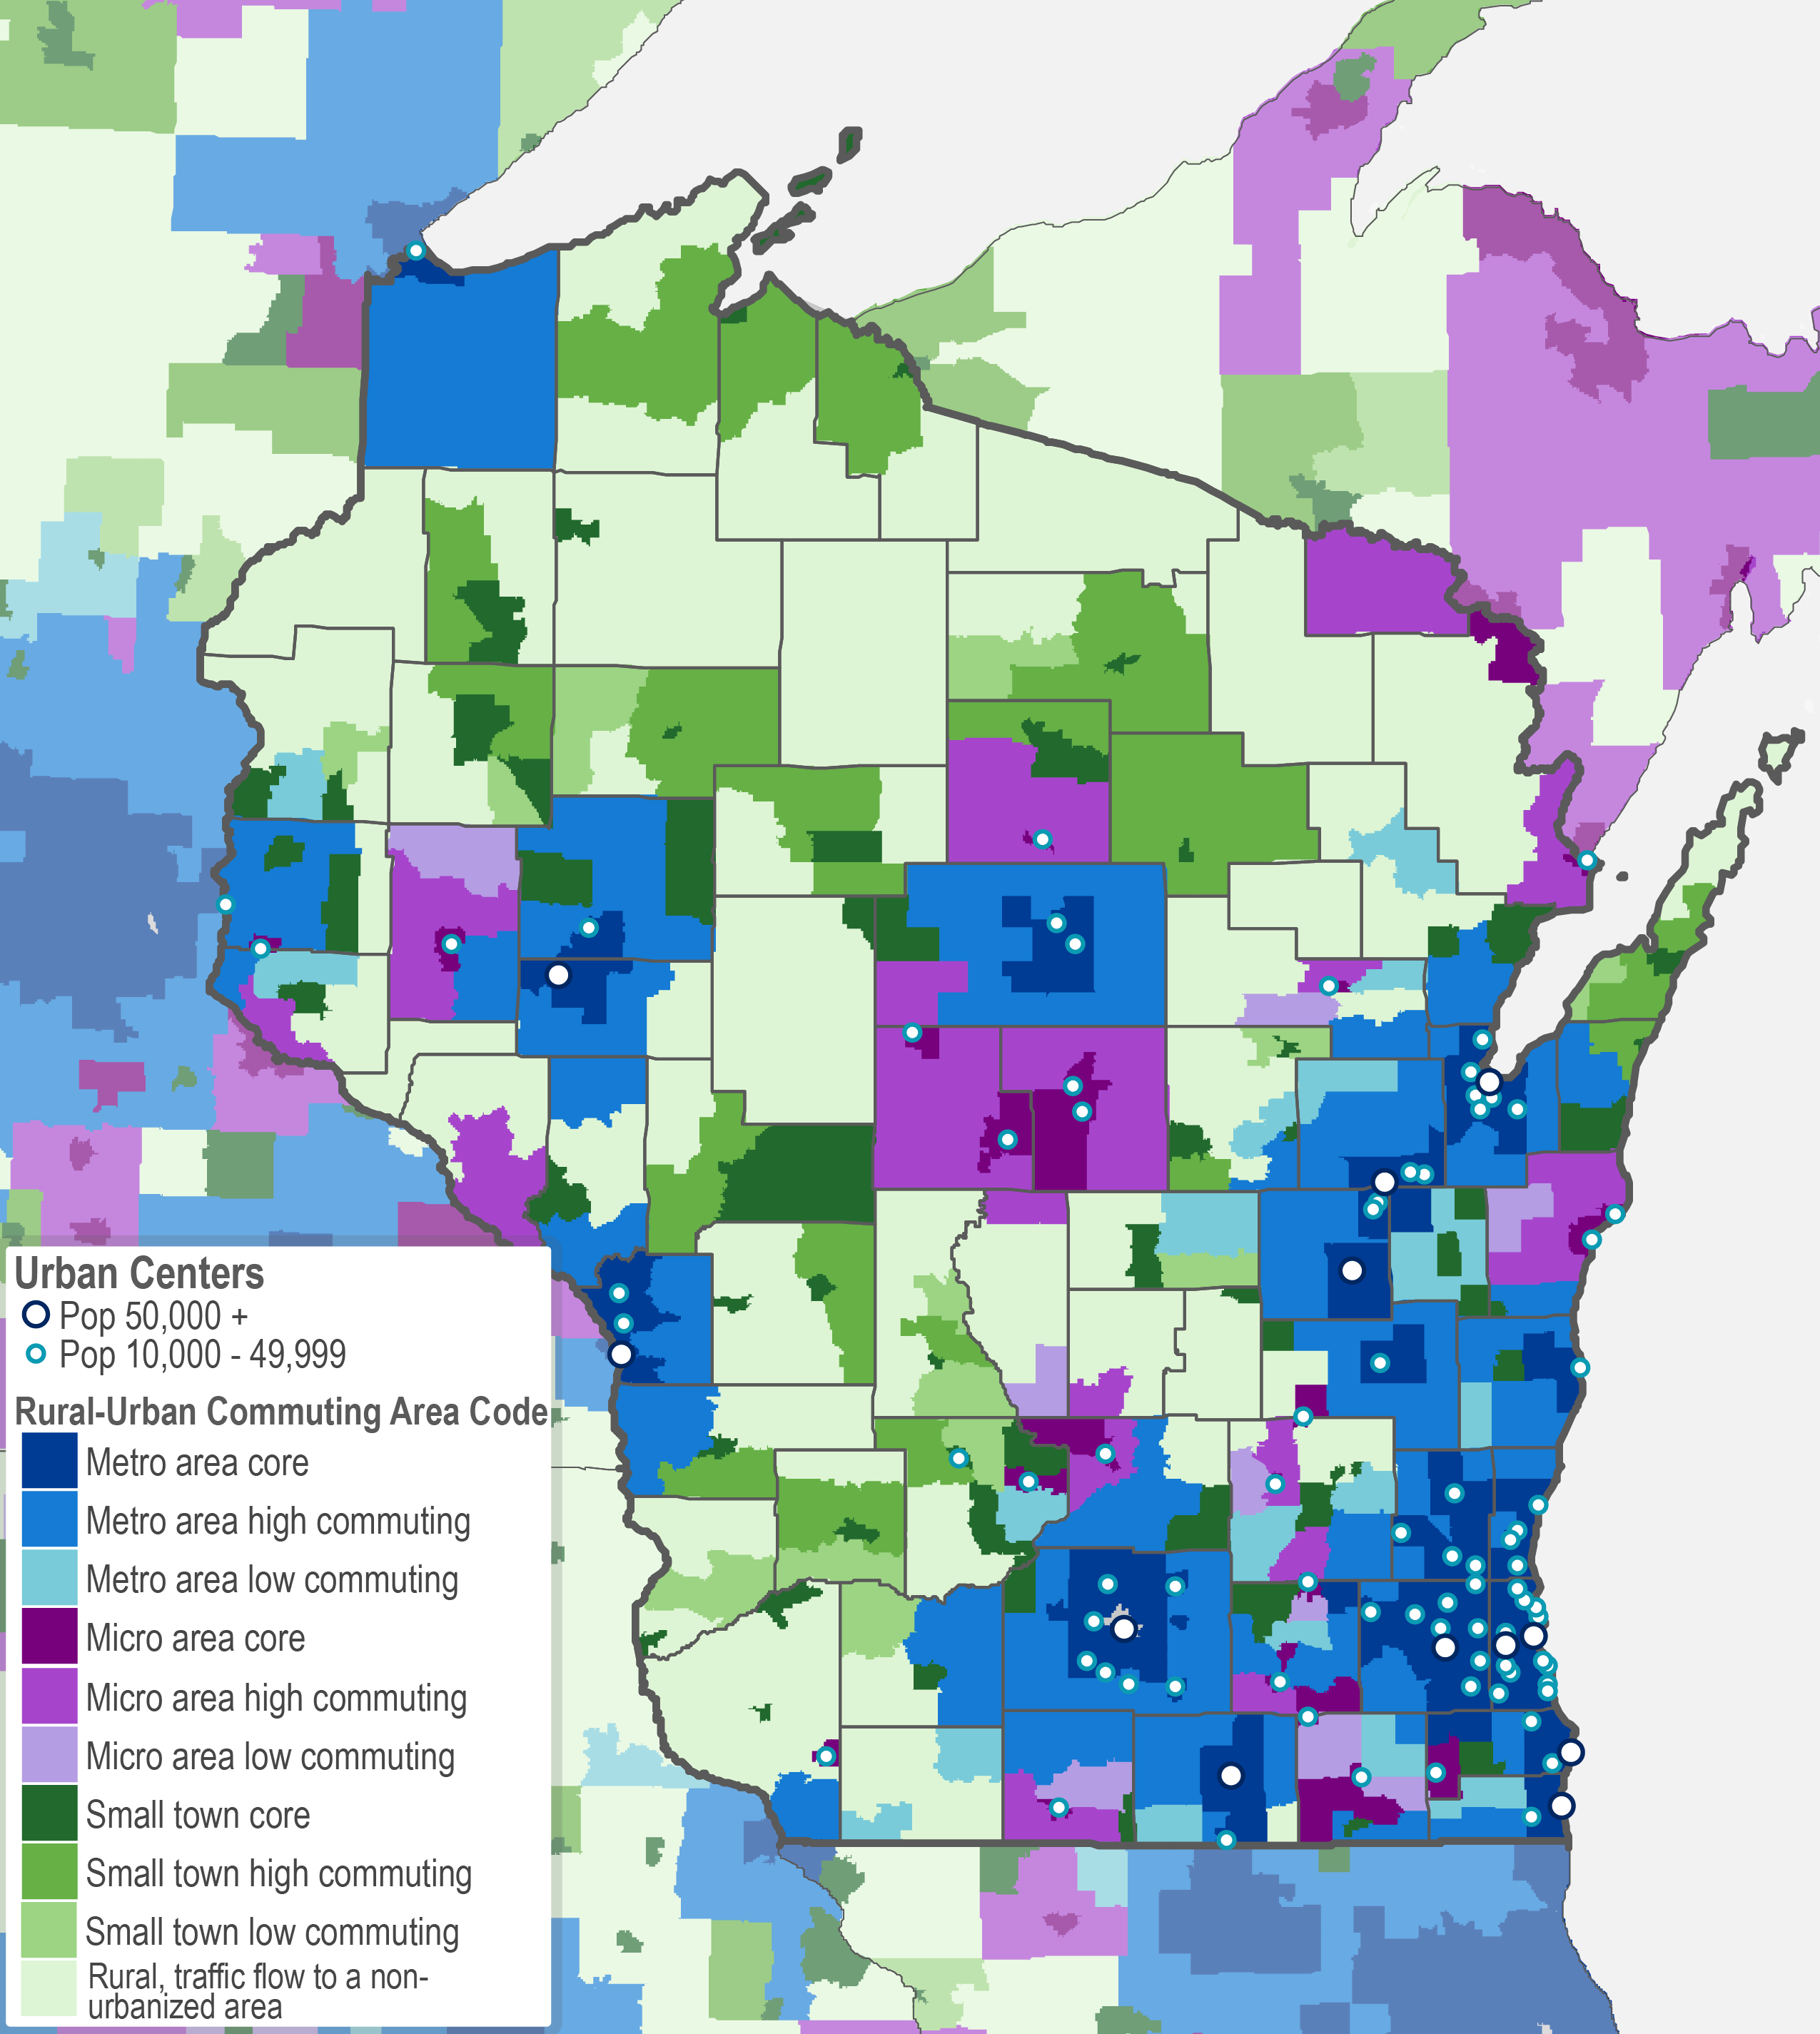 Wisconsin map of Rural-Urban Commuting Area Codes, U.S. Department of Agriculture, 2010